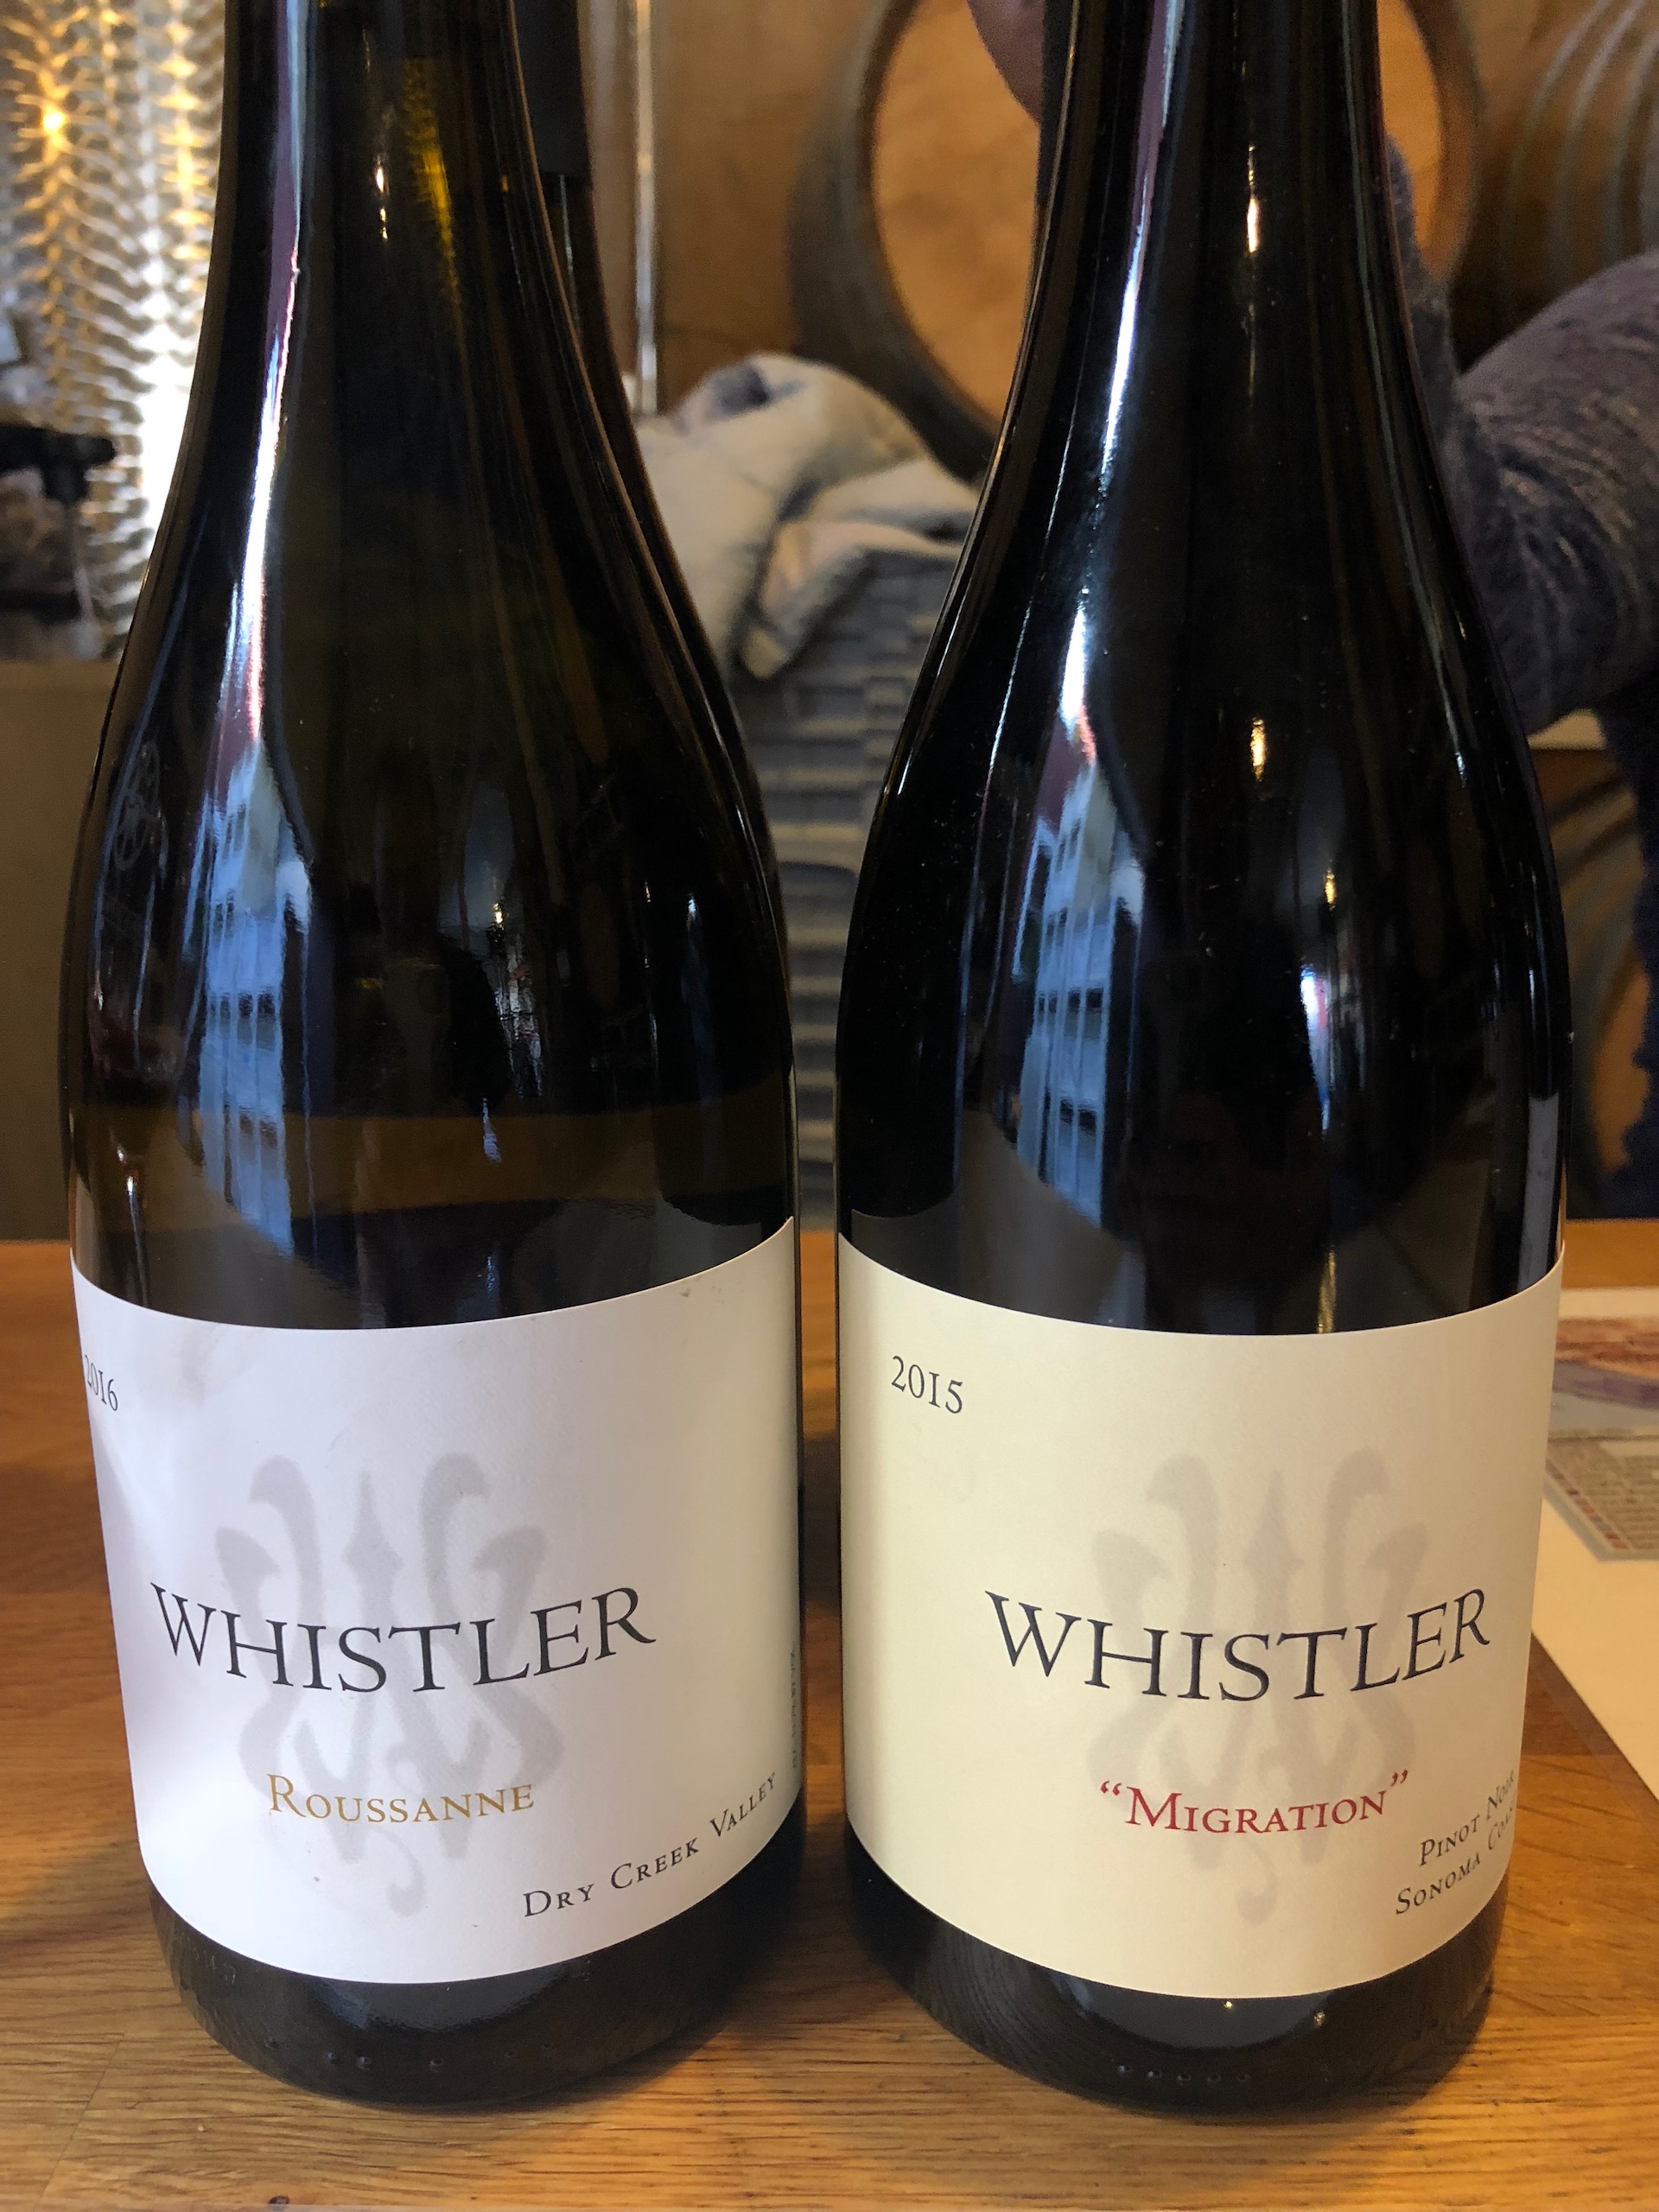 Whistler specializes in excellent estate Pinot Noir from the Sonoma Coast